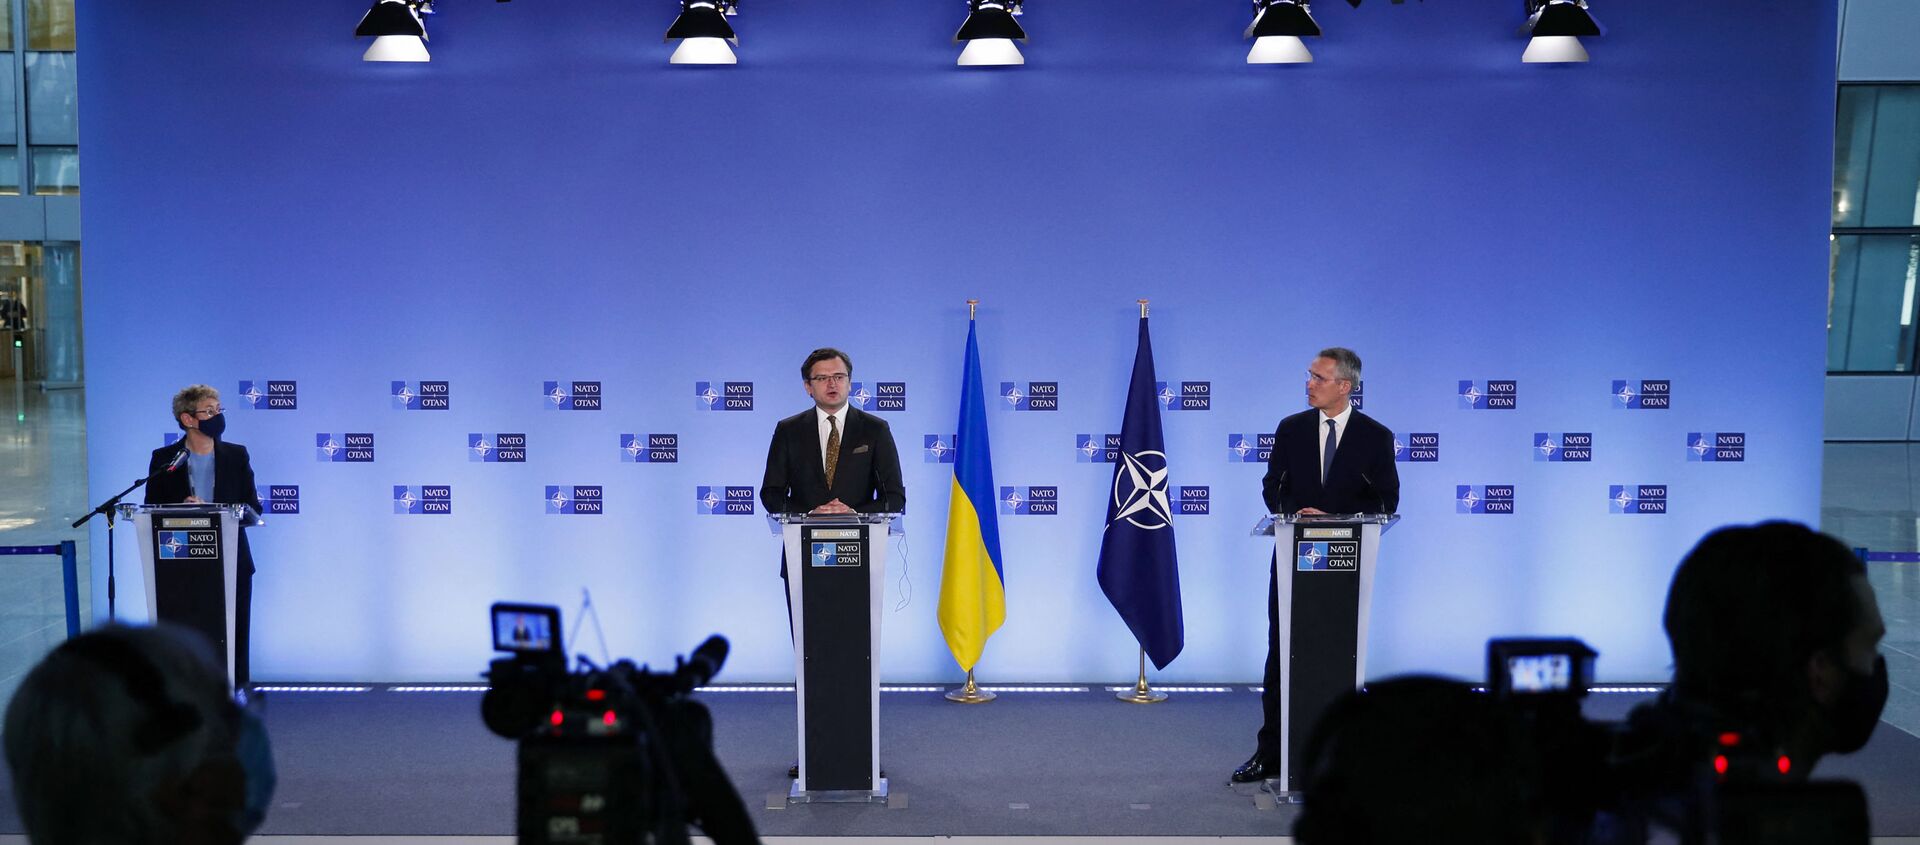 NATO Secretary General Jens Stoltenberg (R) and Ukraine's Foreign Minister Dmytro Kuleba give a press conference following their meeting at NATO headquarters in Brussels, on April 13, 2021. - Sputnik International, 1920, 13.04.2021